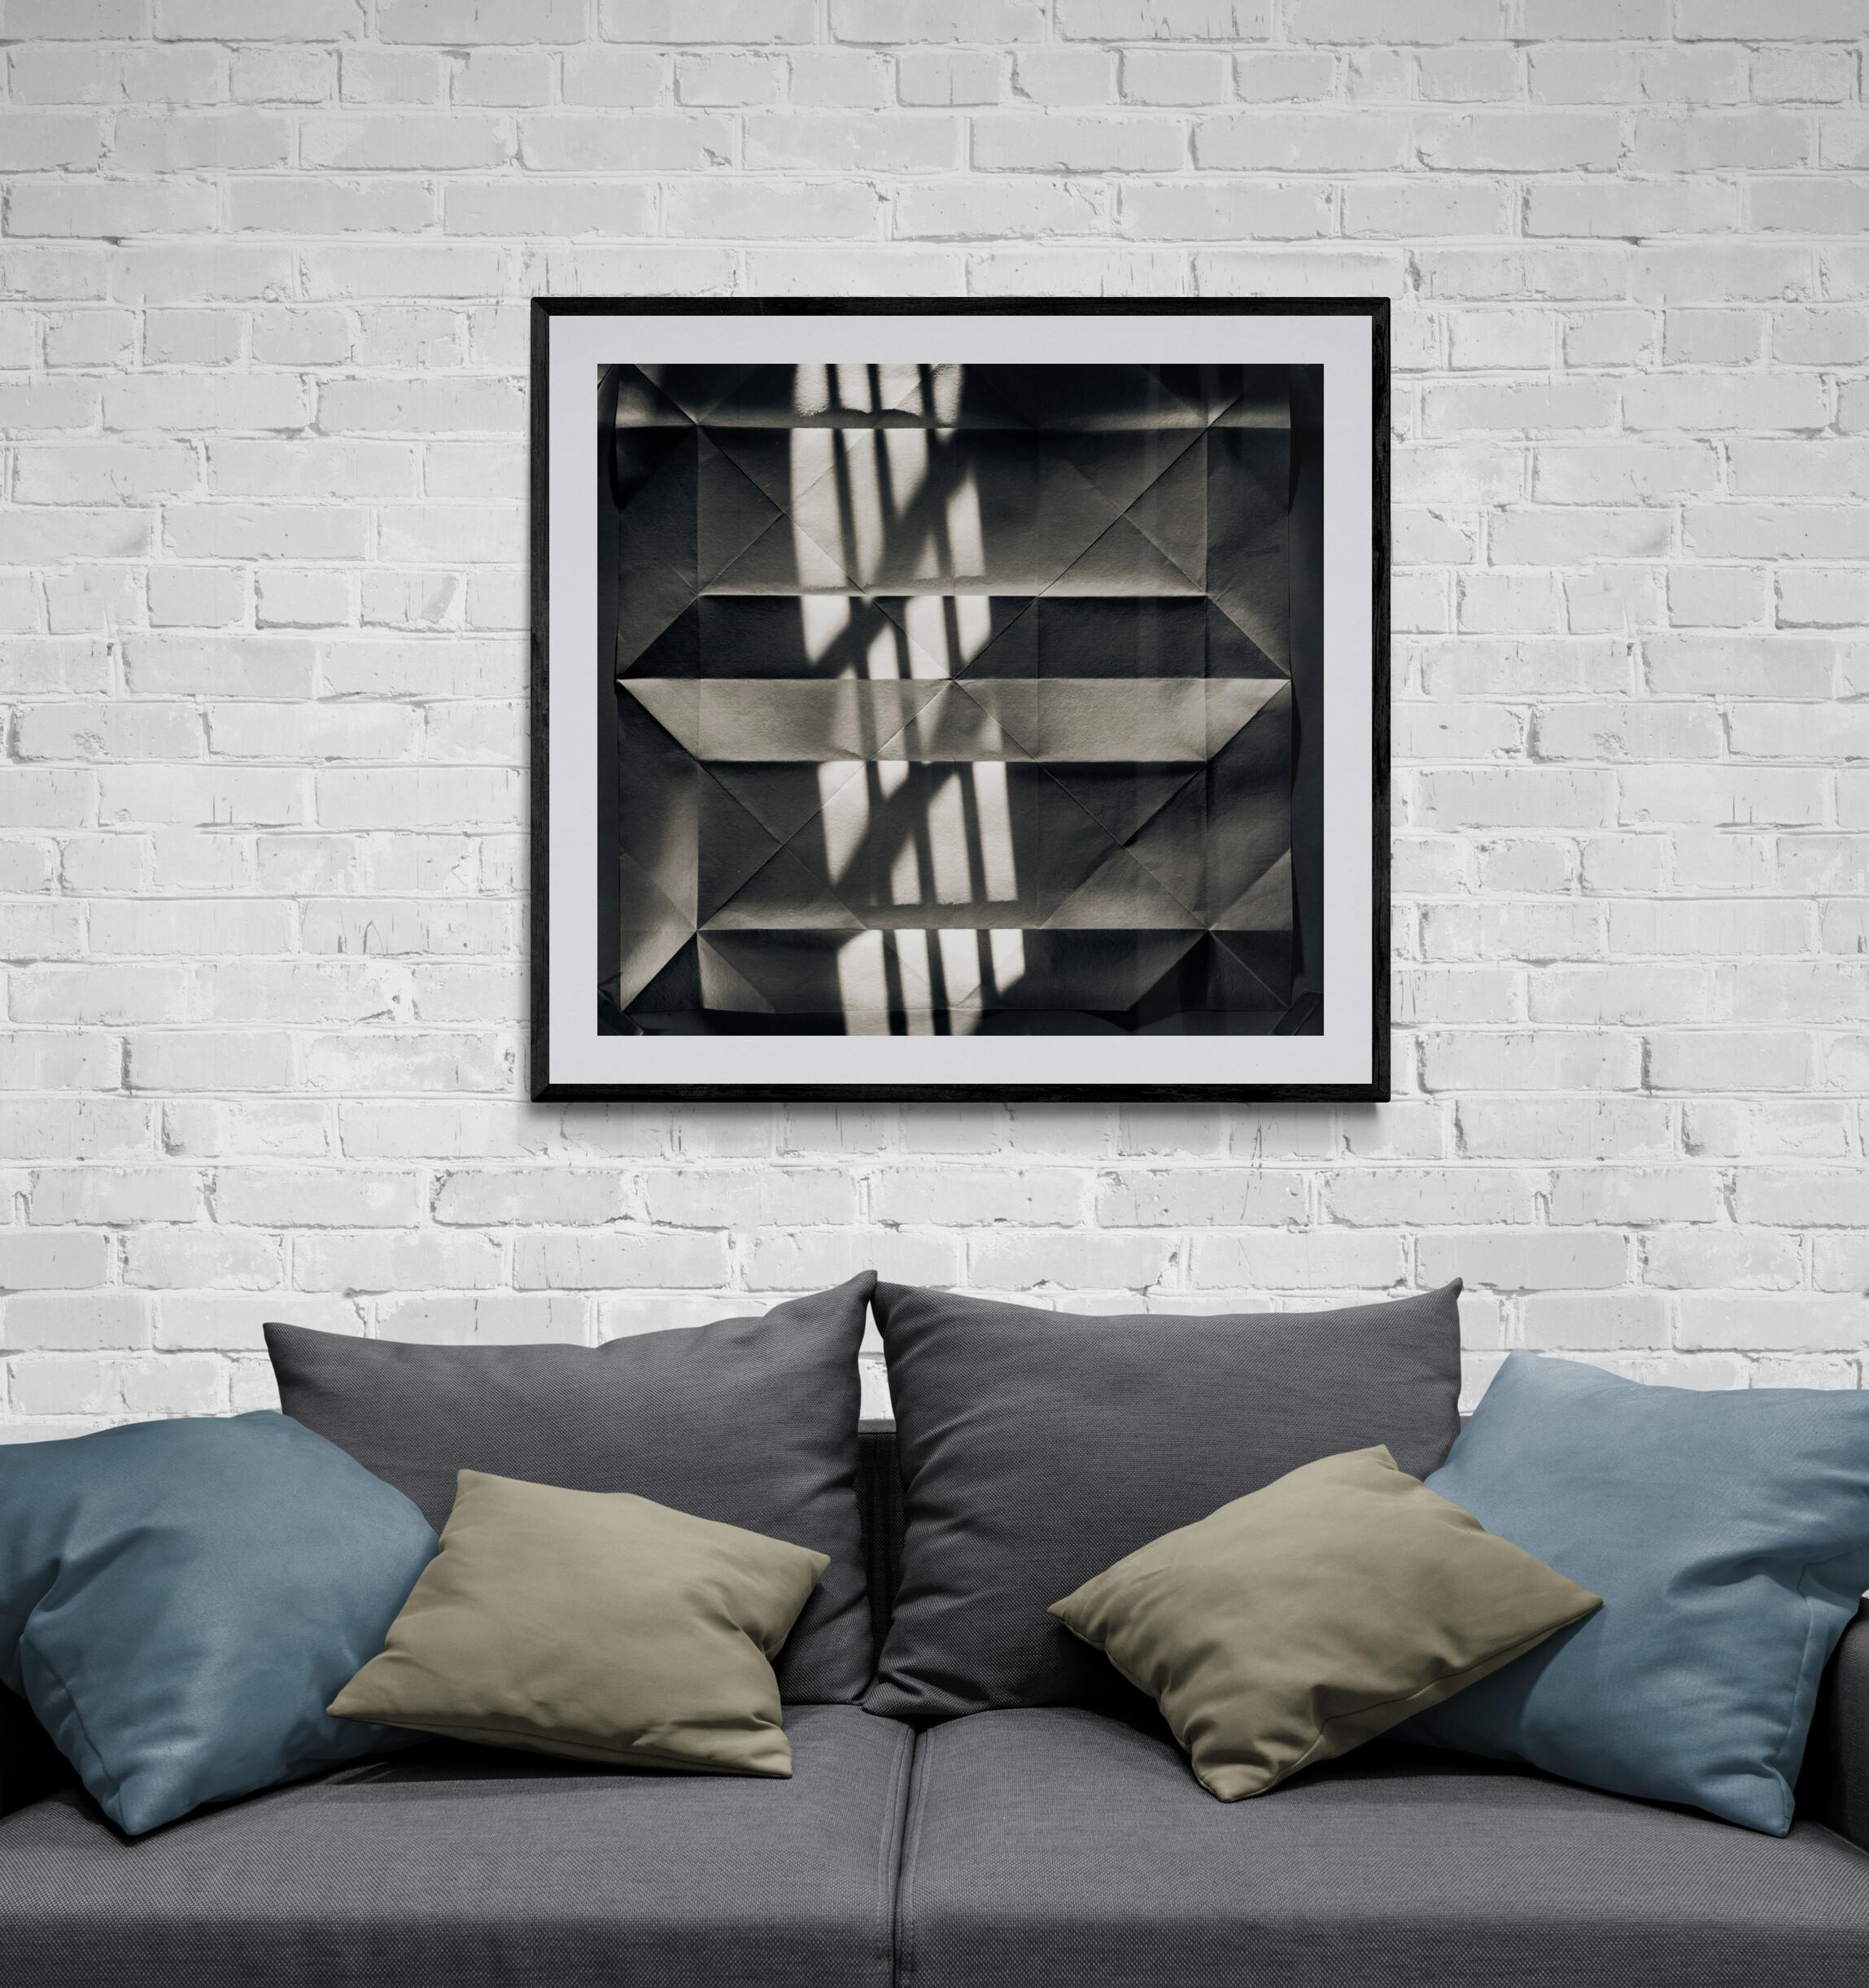  Limited Edition Black and White Abstract Photograph  - Origami Folds #38 For Sale 1